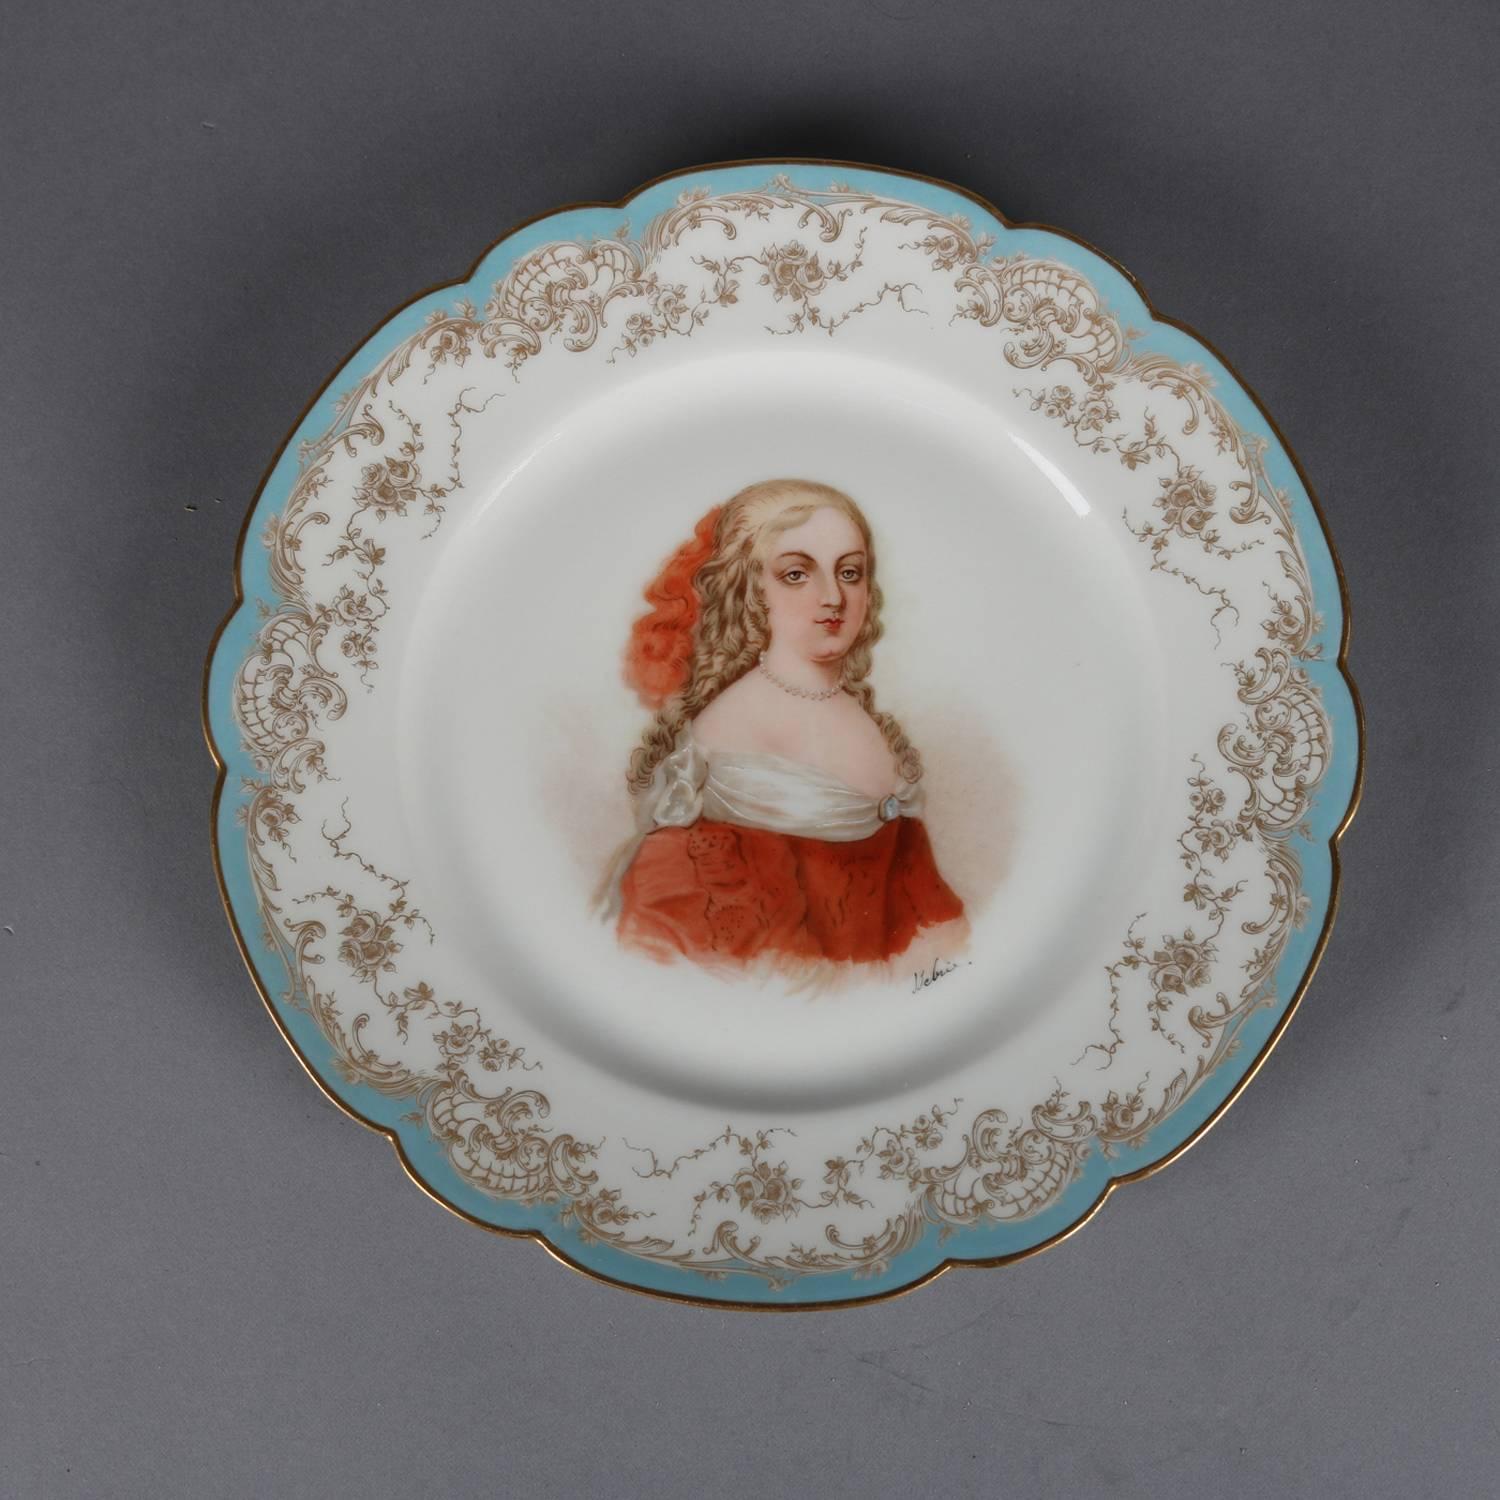 Antique French portrait plate by Sevres for Chateau de St Cloud features well with central artist signed portrait of Madame de Montespan by Debrie, rim with gilt scalloped edges and decorated with blue and gilt foliate and scroll motif, en verso